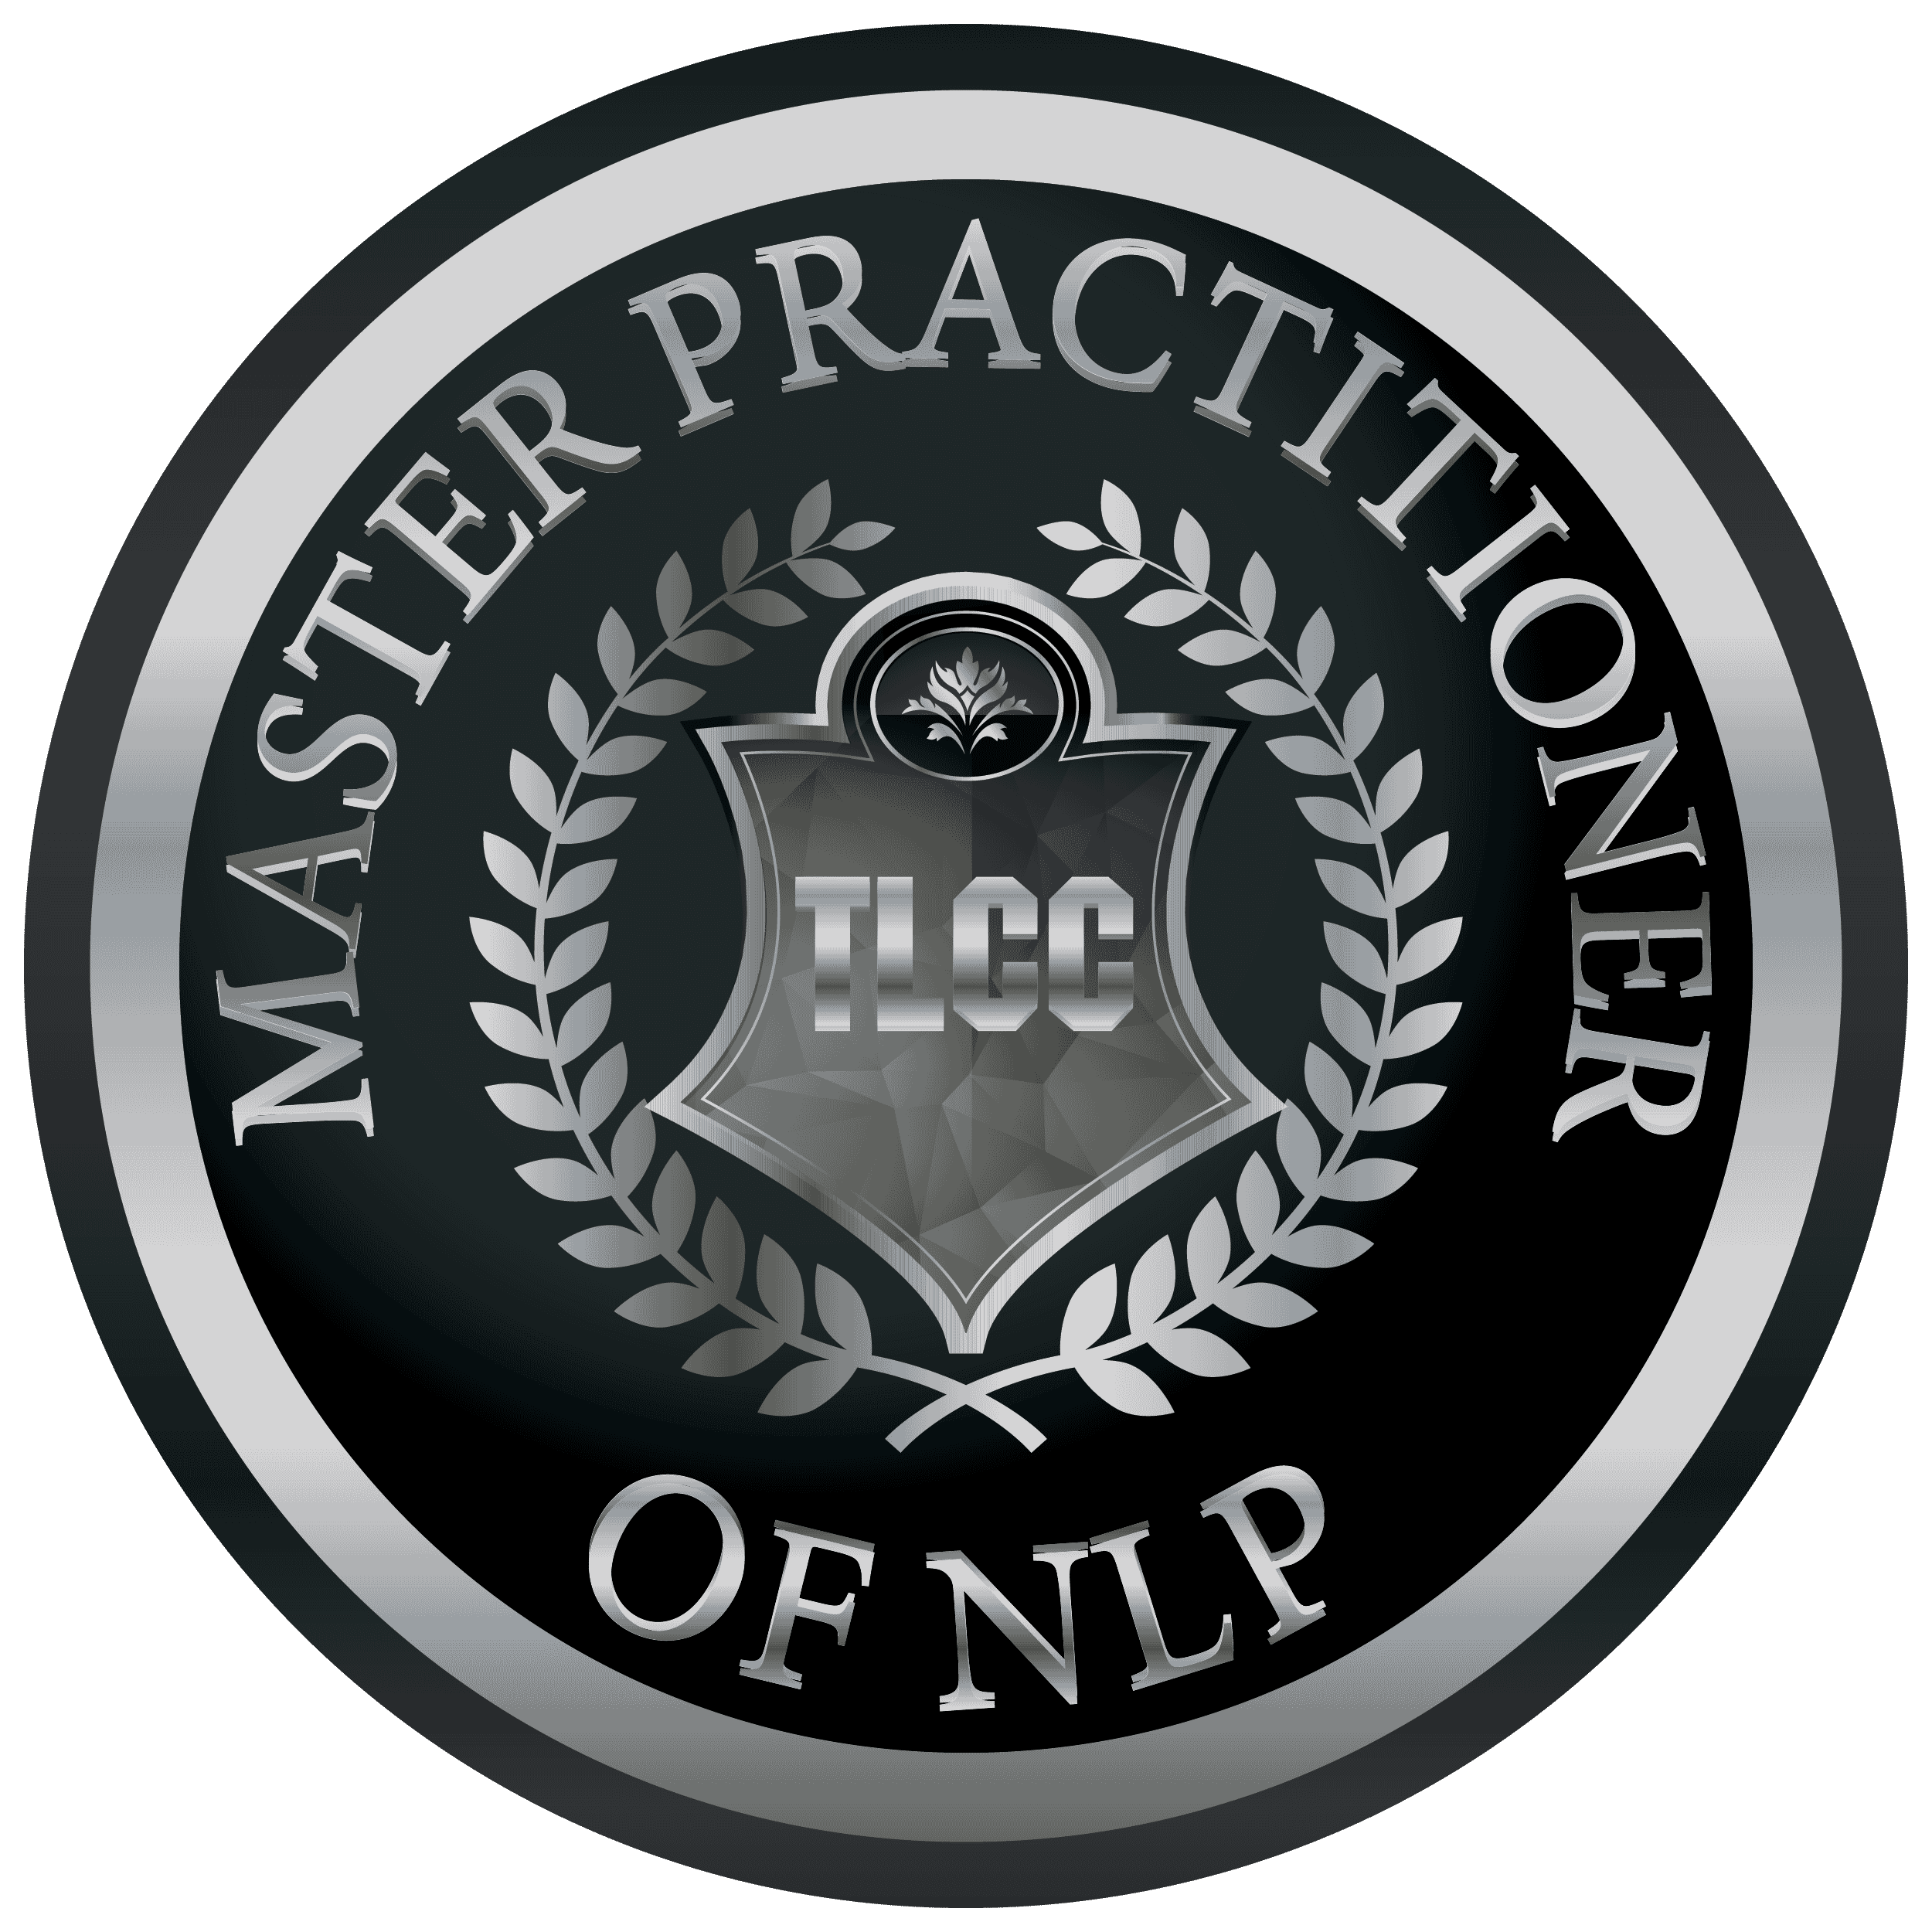 Master%20Practitioner%20of%20NLP.png